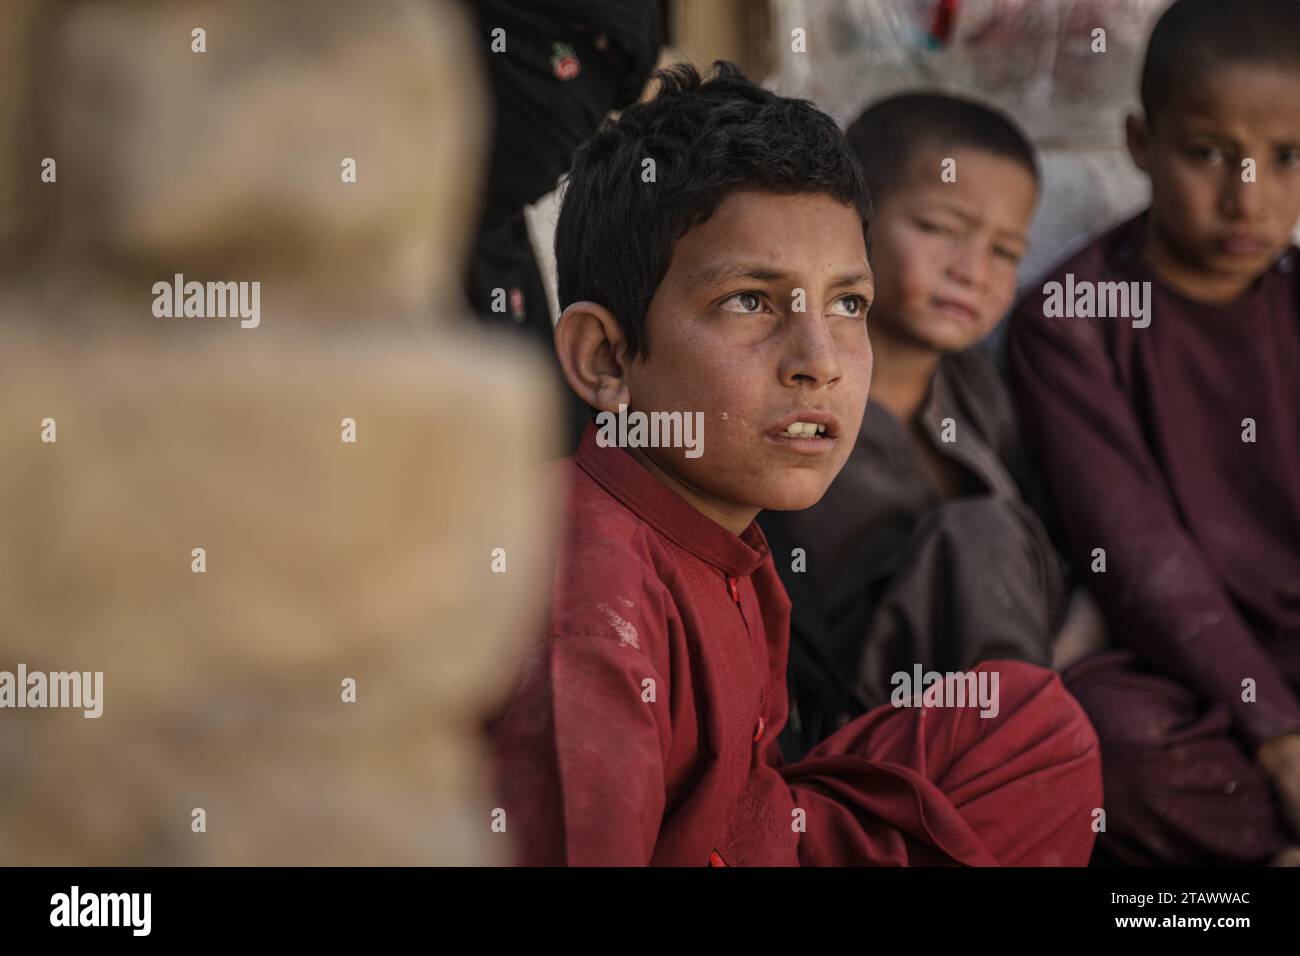 Needy refugee children in a dire situation seeking assistance | Refugee children in need, looking for help in a difficult situation. Stock Photo